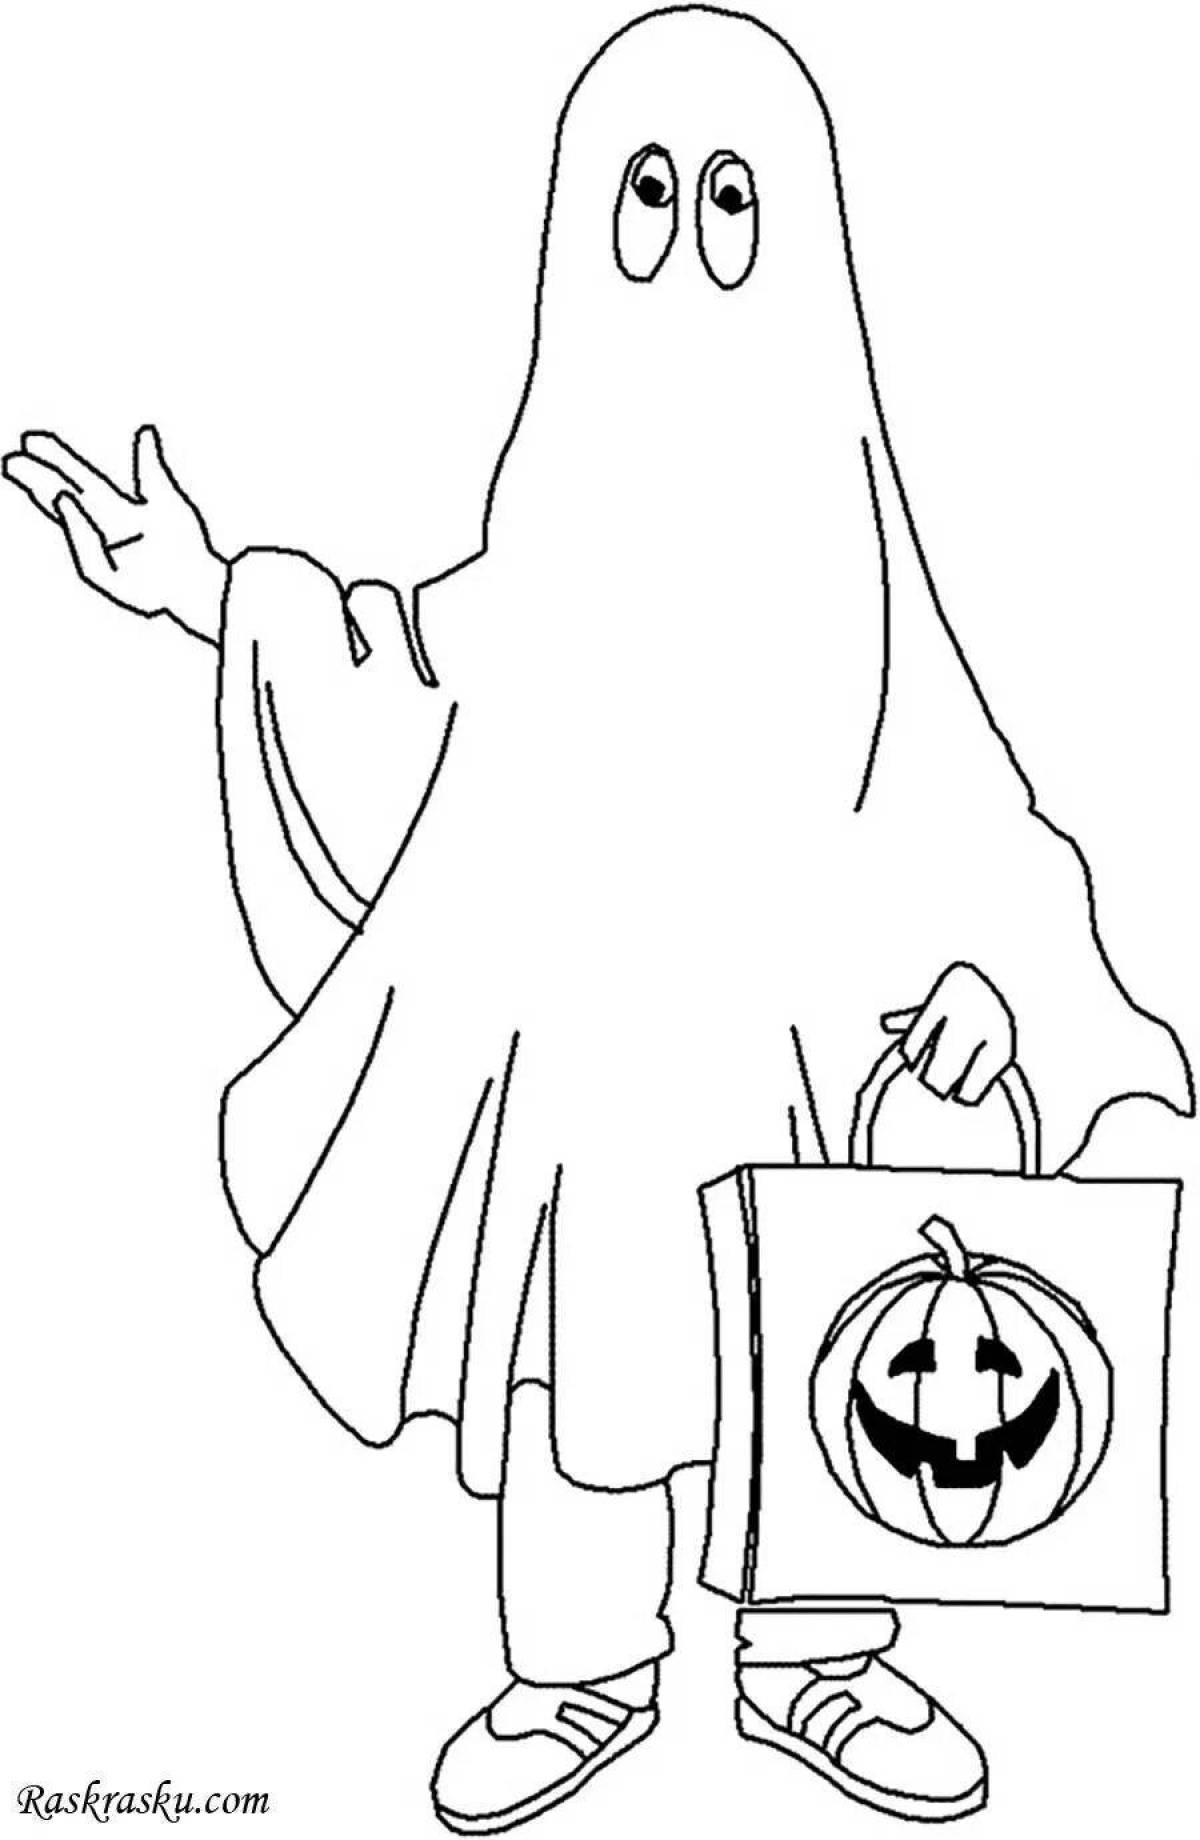 Spooky ghost coloring book for kids